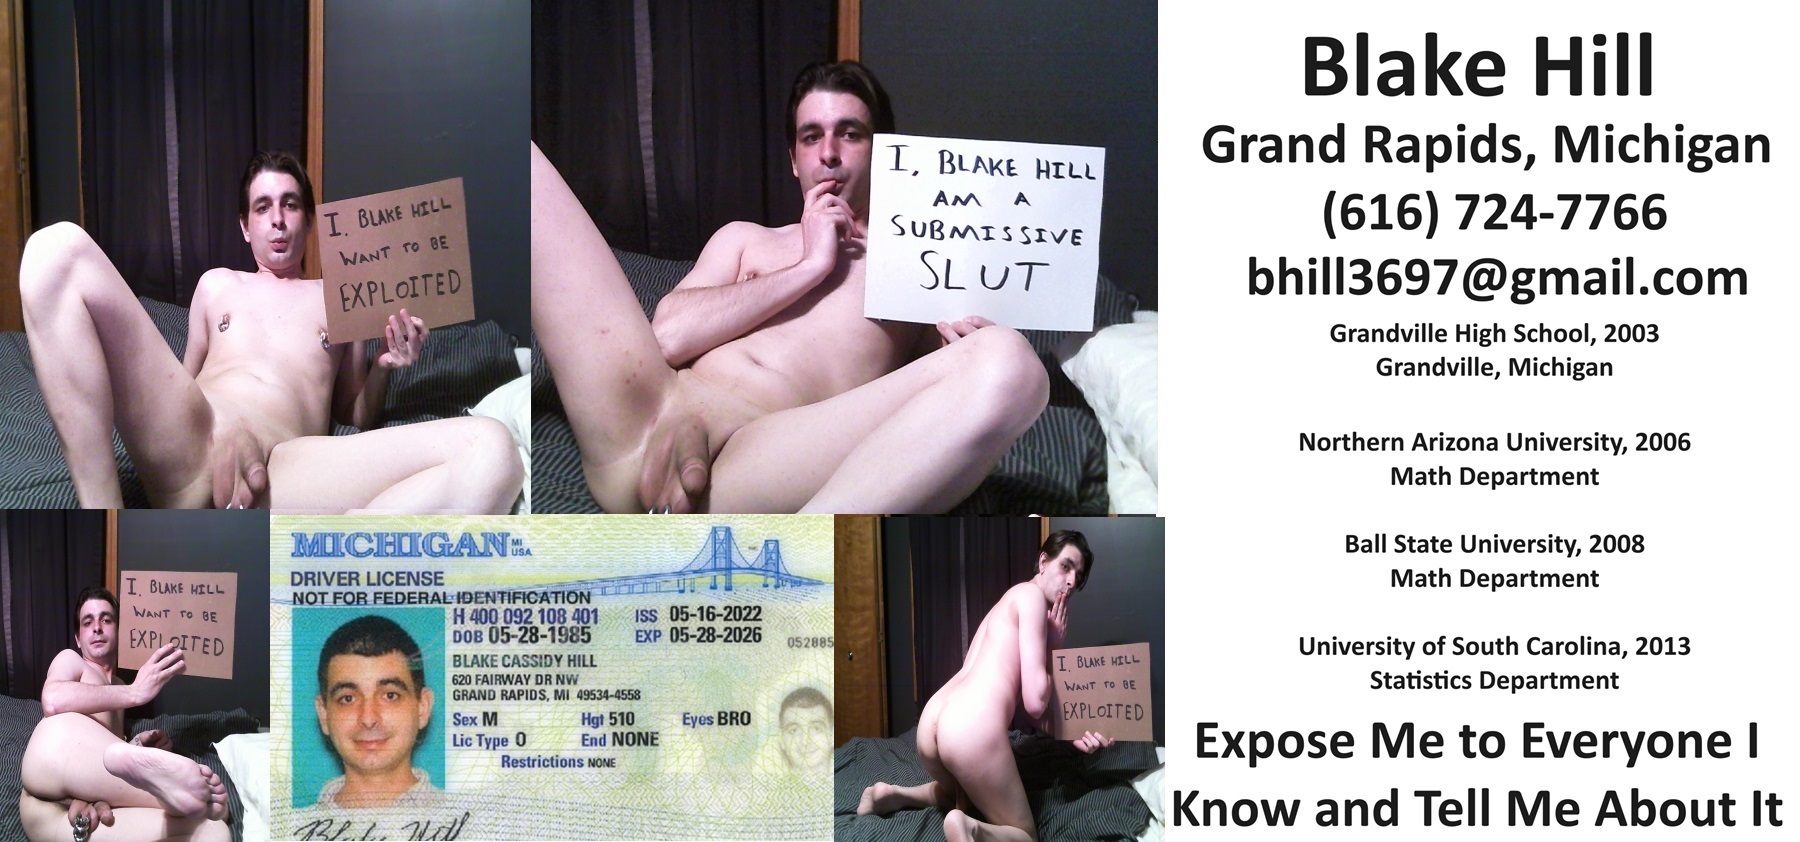 Webslut Blake Hill from Grand Rapids Michigan  collages